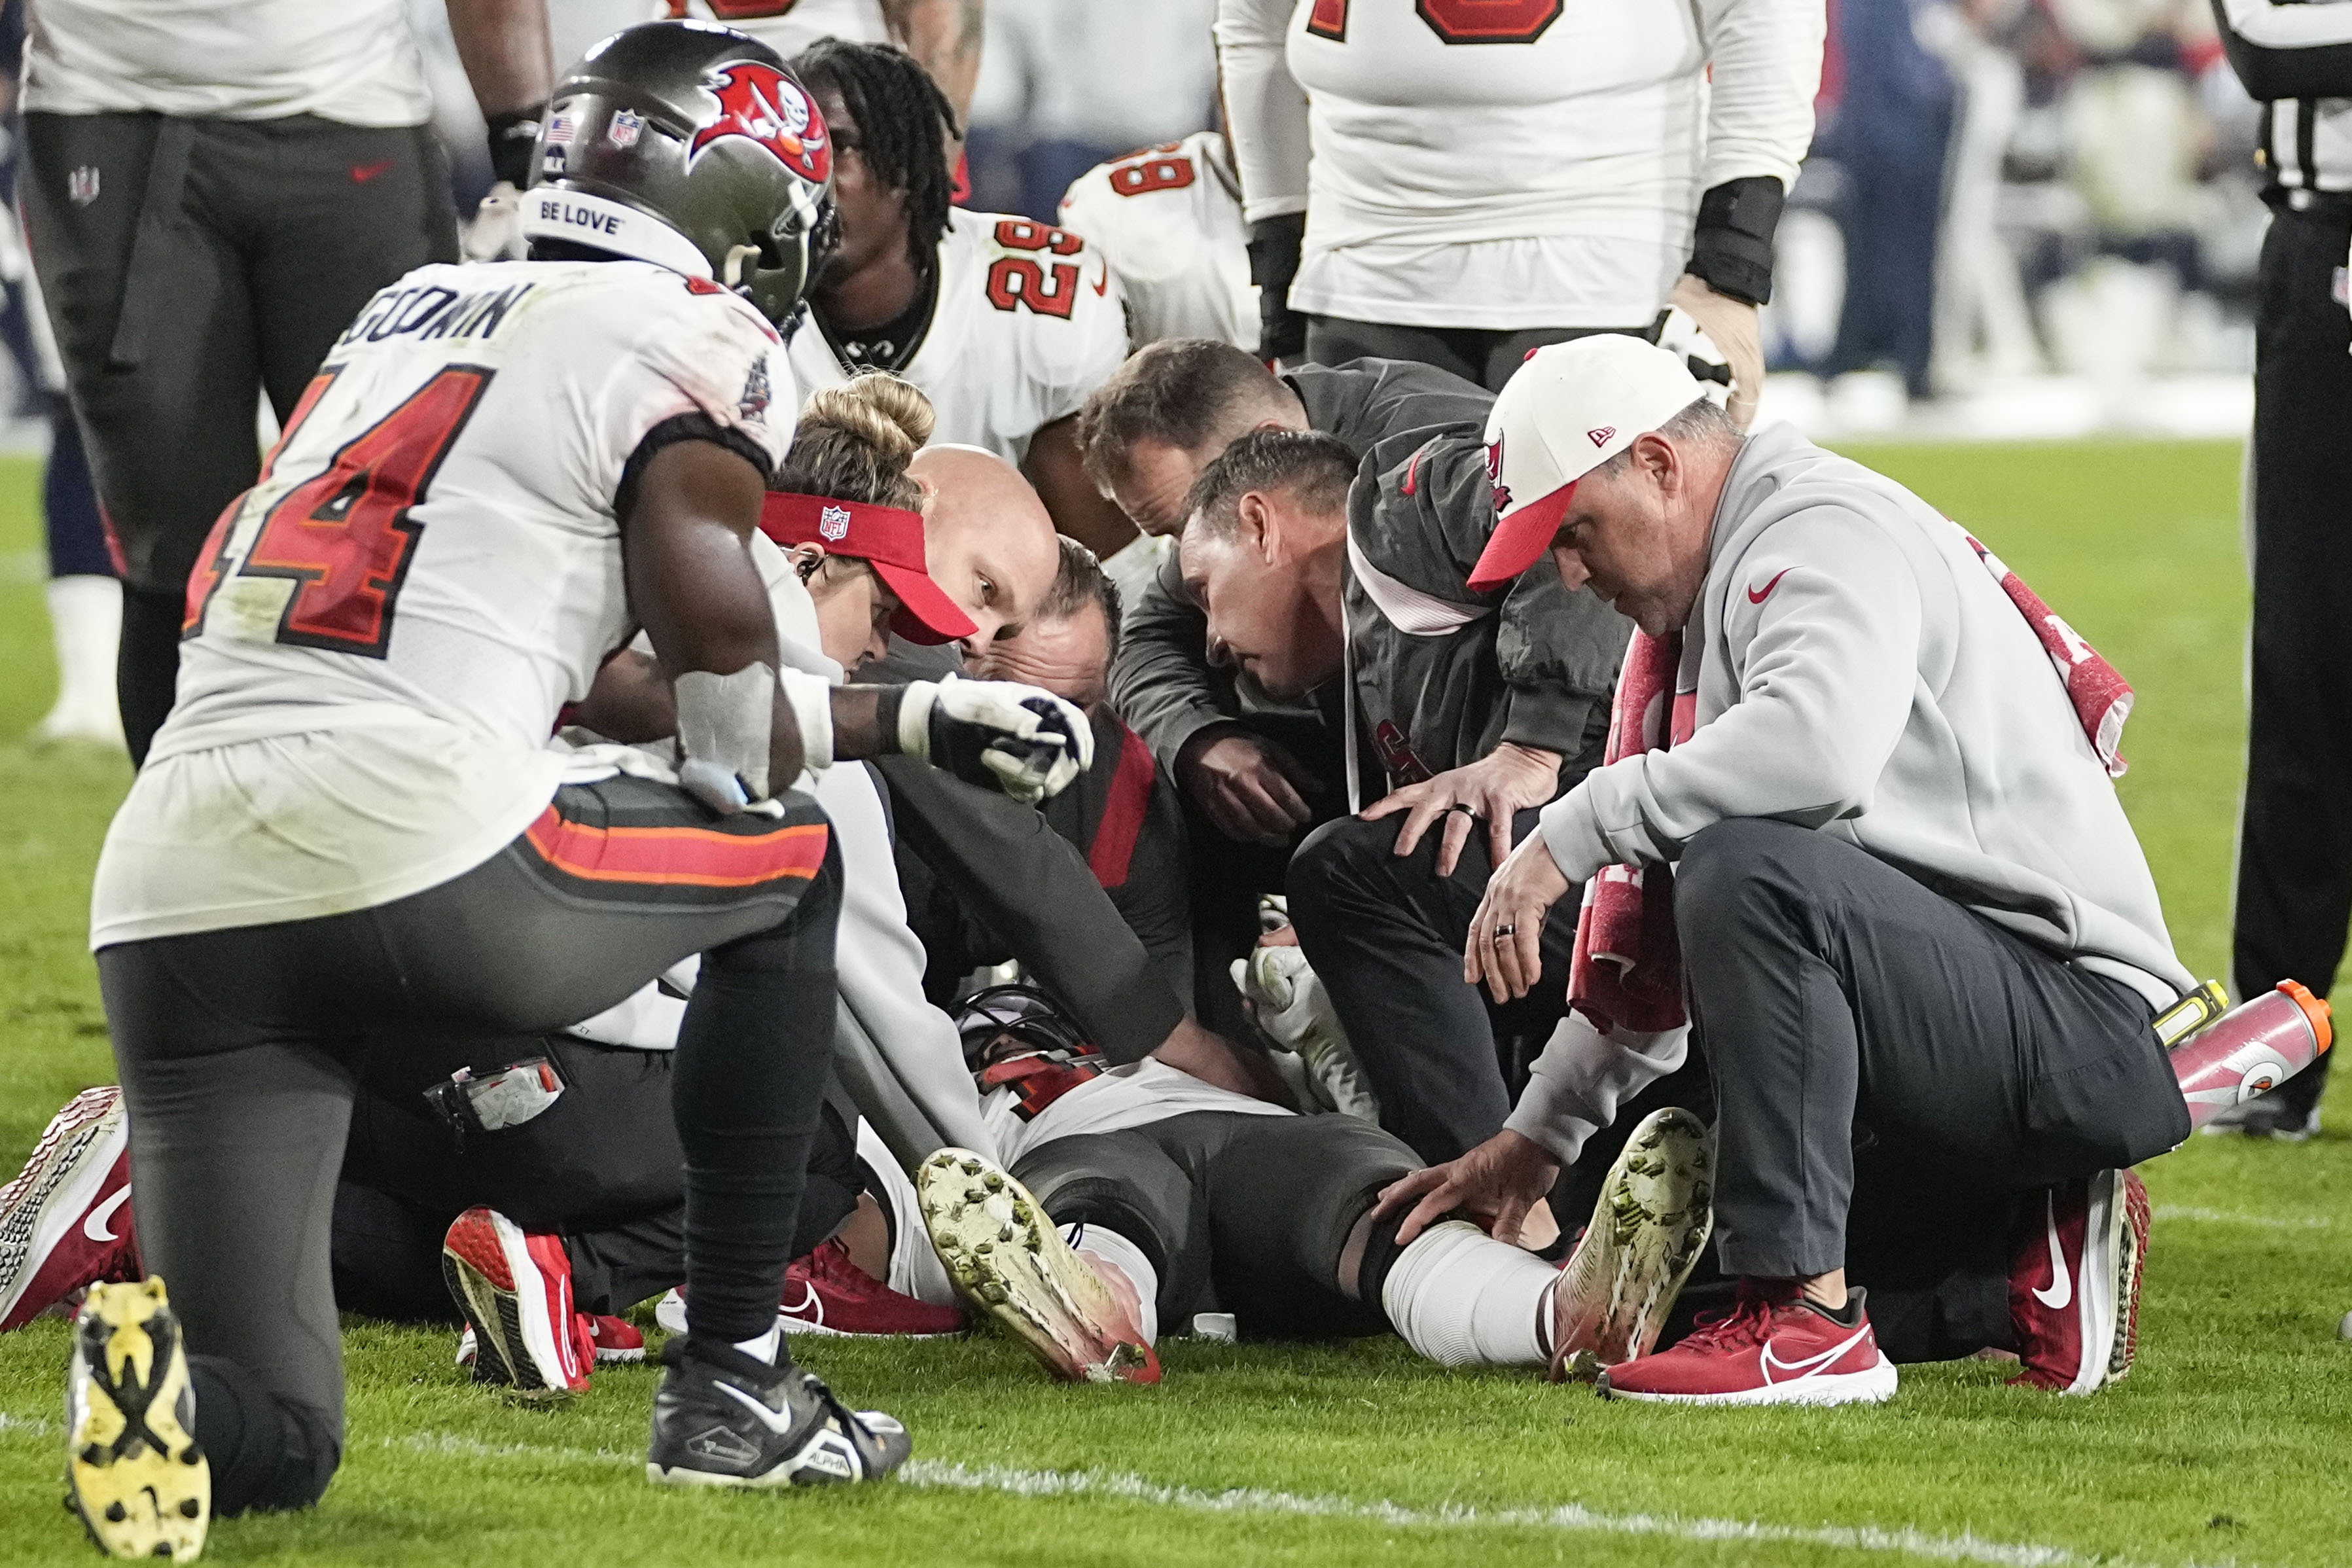 Russell Gage: Tampa Bay Buccaneers WR taken off on stretcher